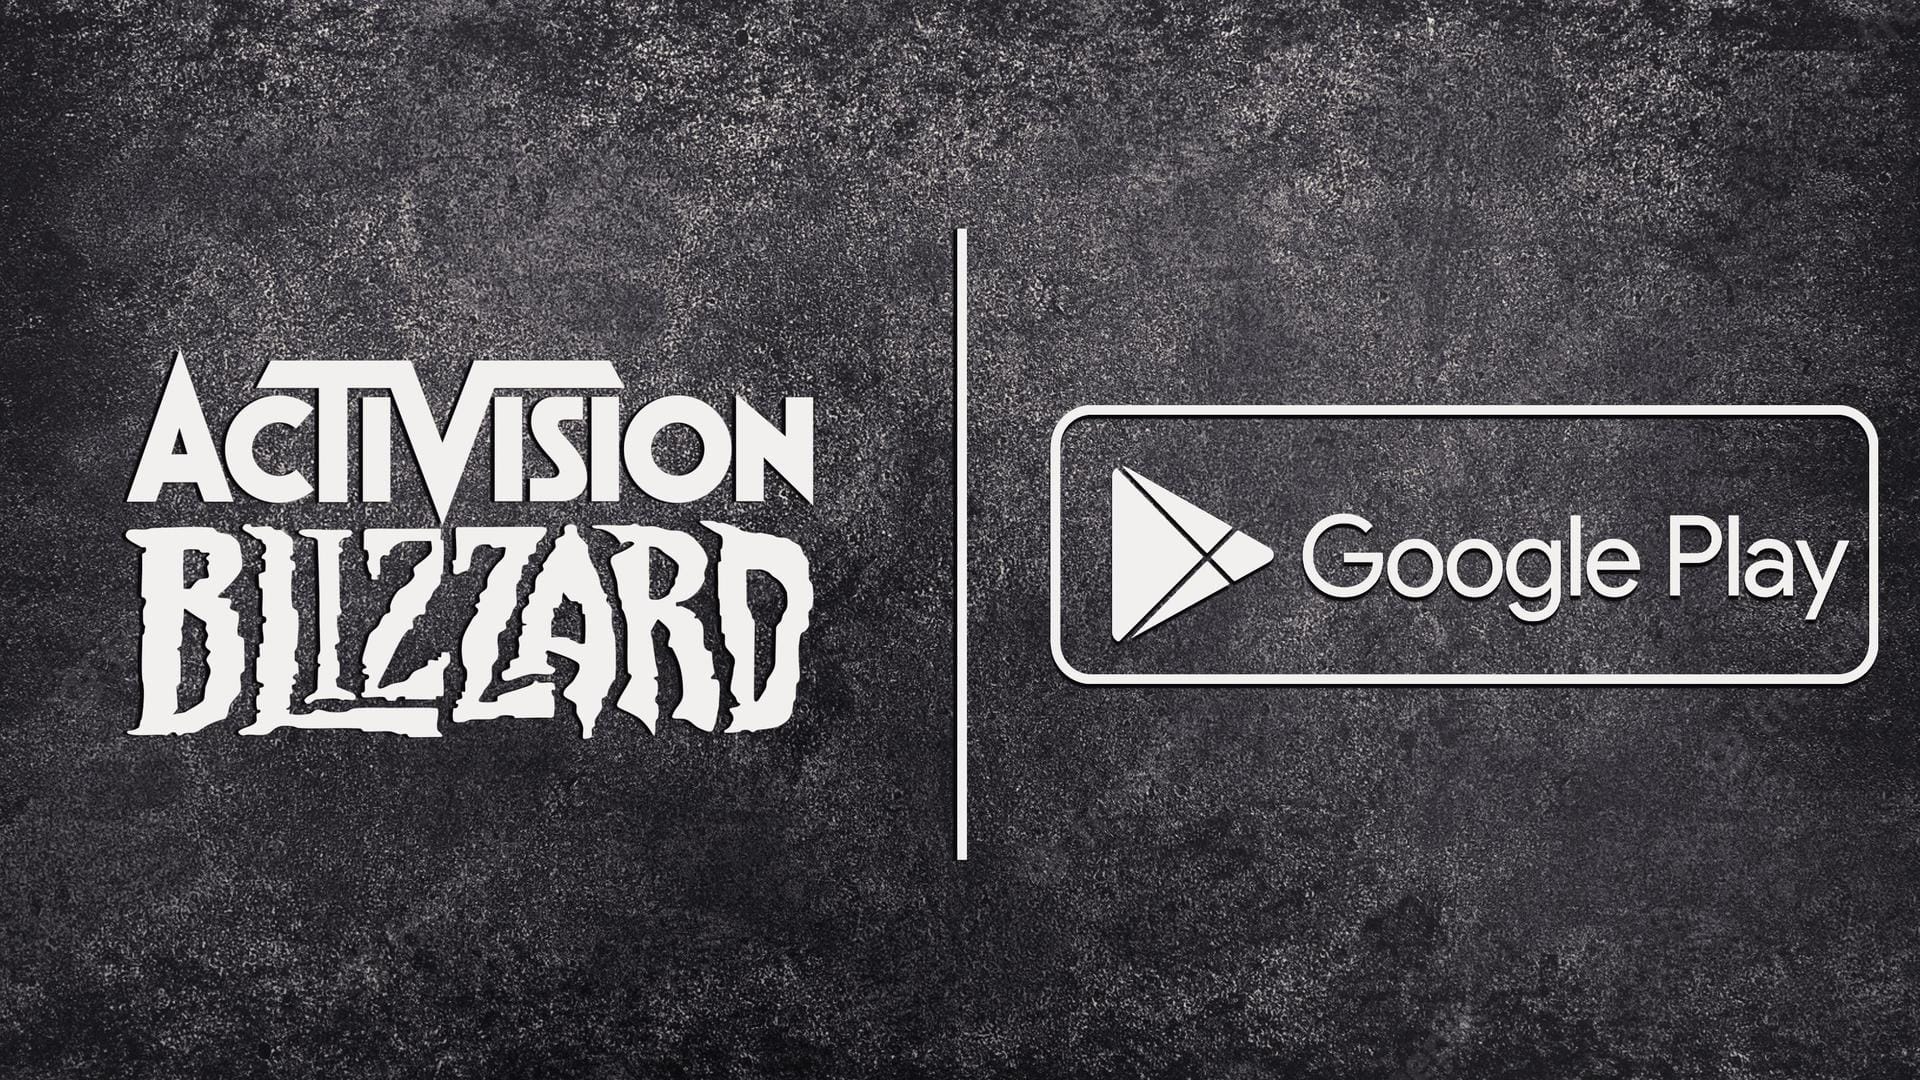 Google paid Activision Blizzard to prevent Play Store rival: Epic